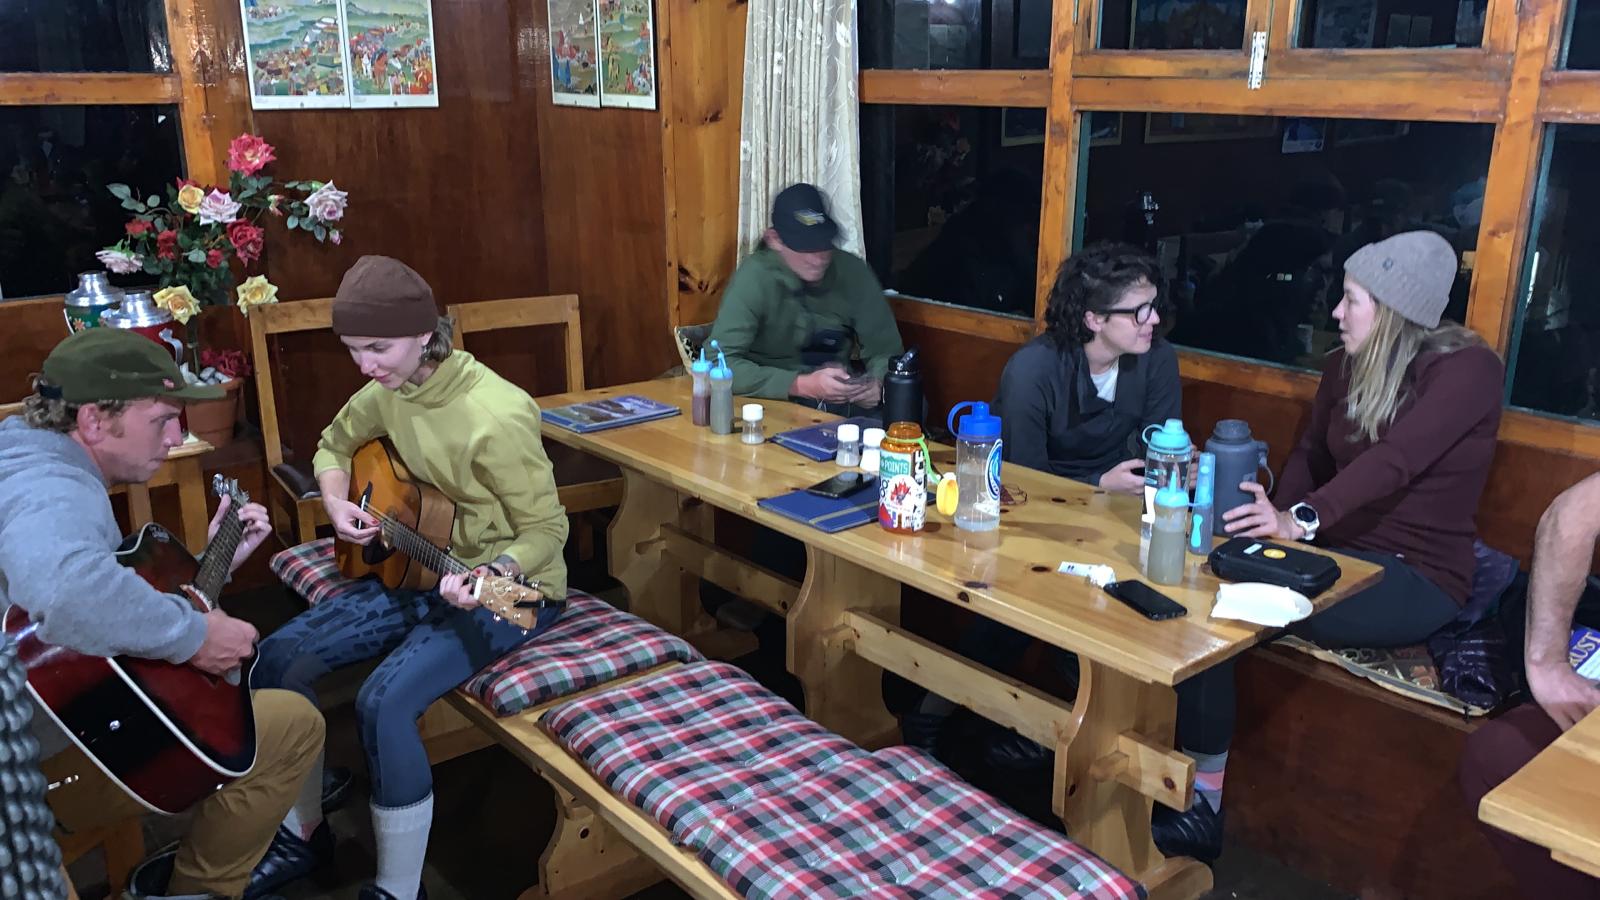 Post dinner guitar session at the Rivendell lodge, Debuche